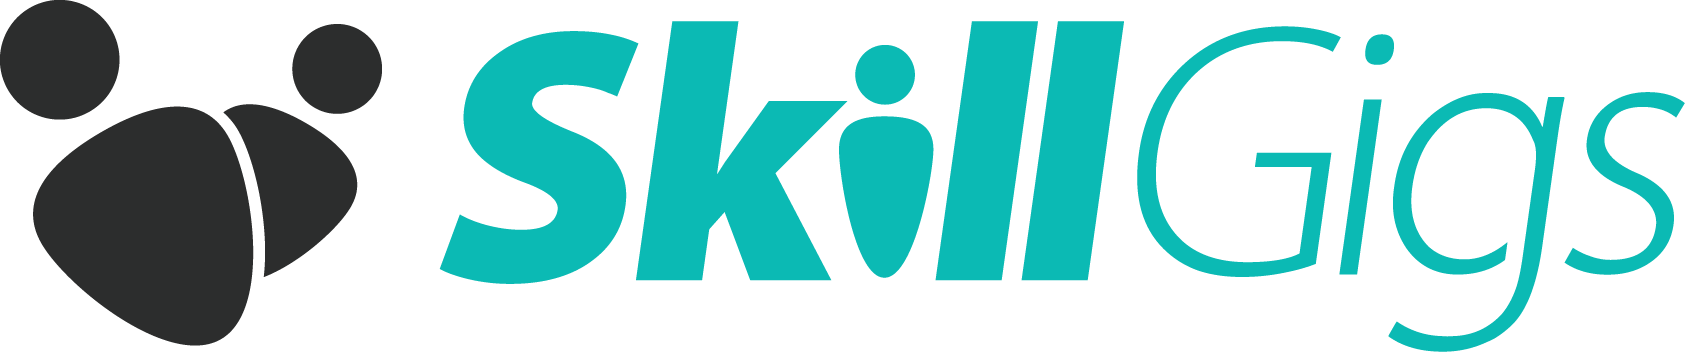 skillgigs-logo-solid-two.png